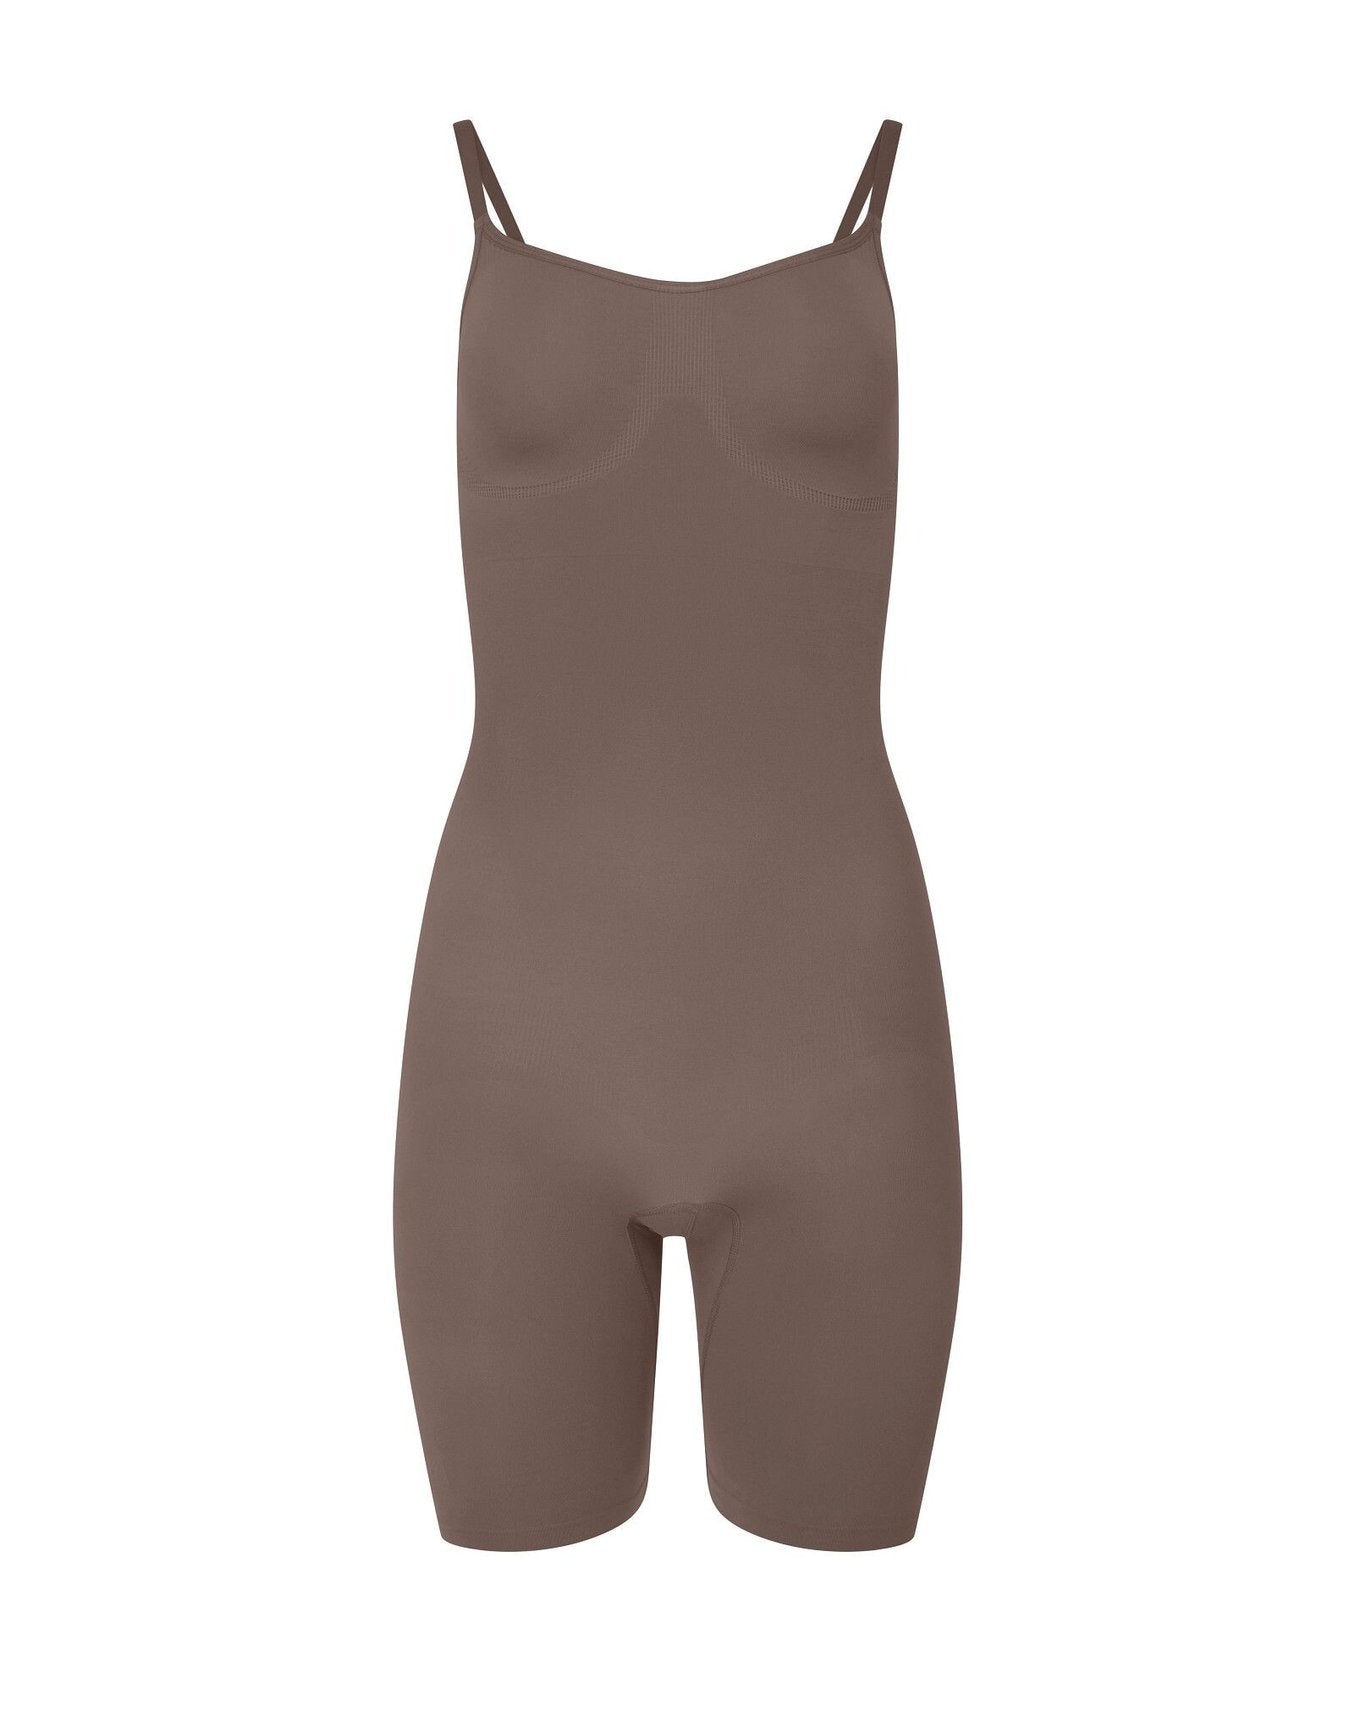 nueskin Analise High-Compression Underbust Bodysuit in color Deep Taupe and shape bodysuit